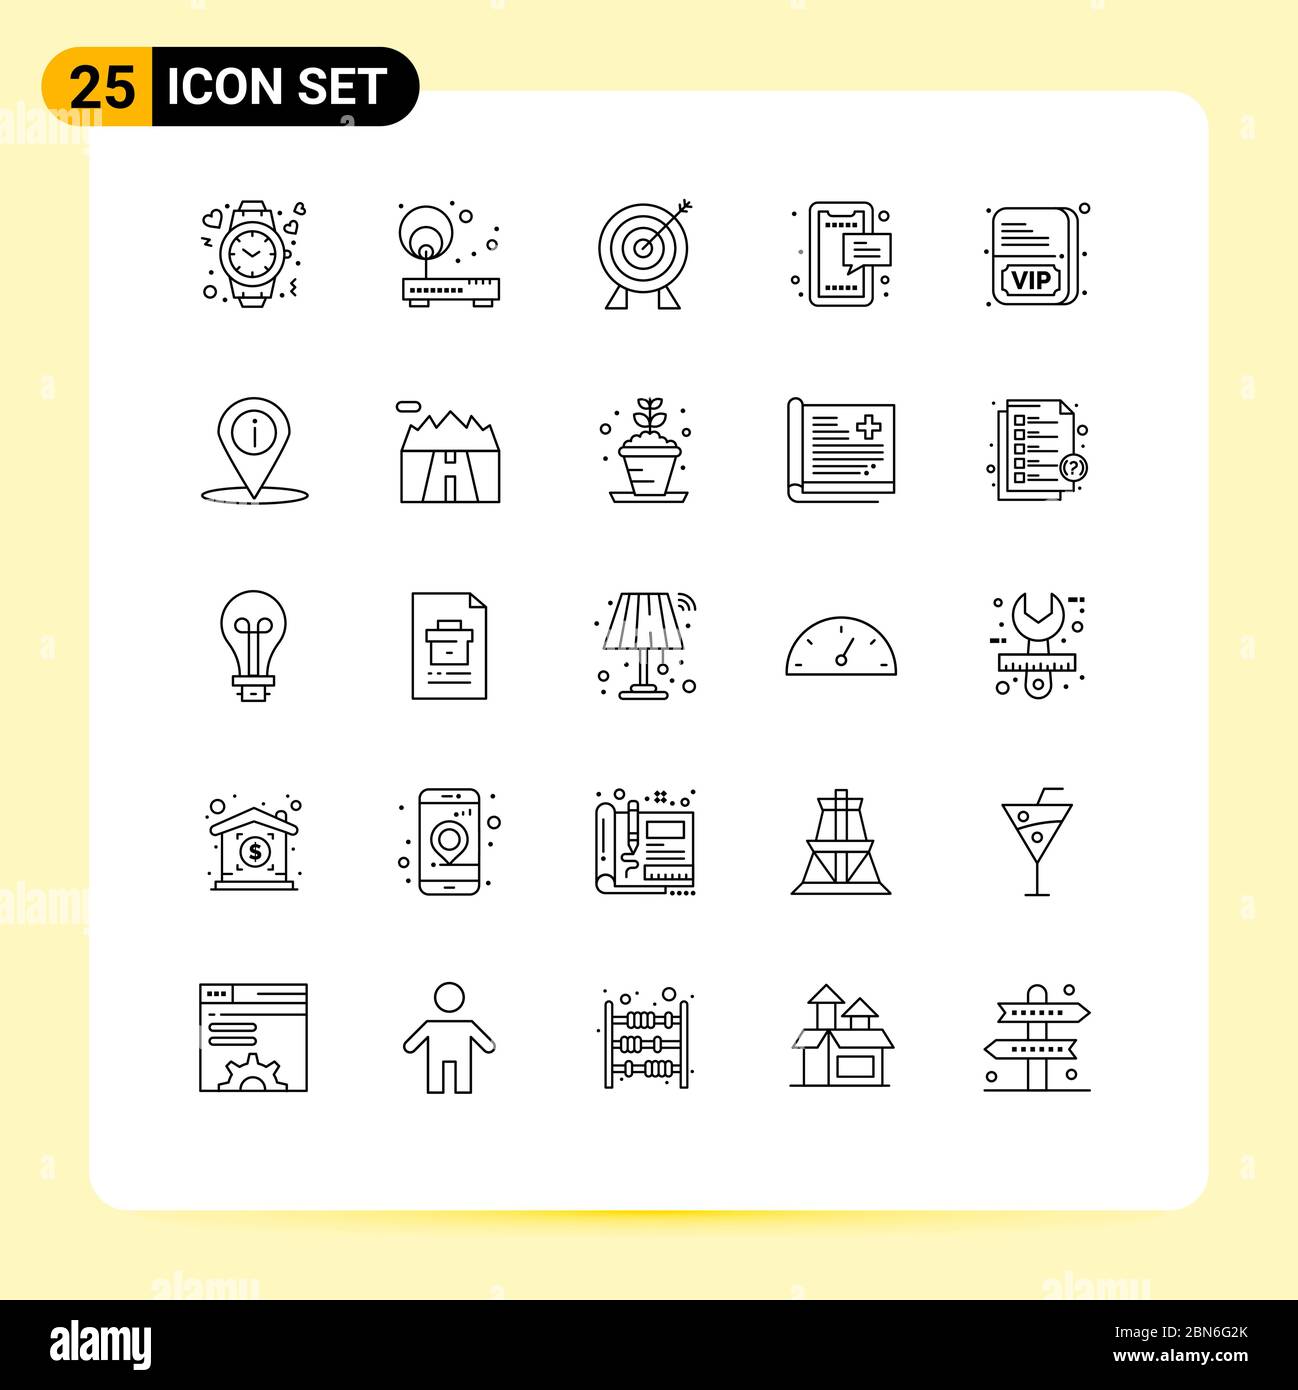 Set of 25 Modern UI Icons Symbols Signs for mobile, chat, point, sms, investment Editable Vector Design Elements Stock Vector